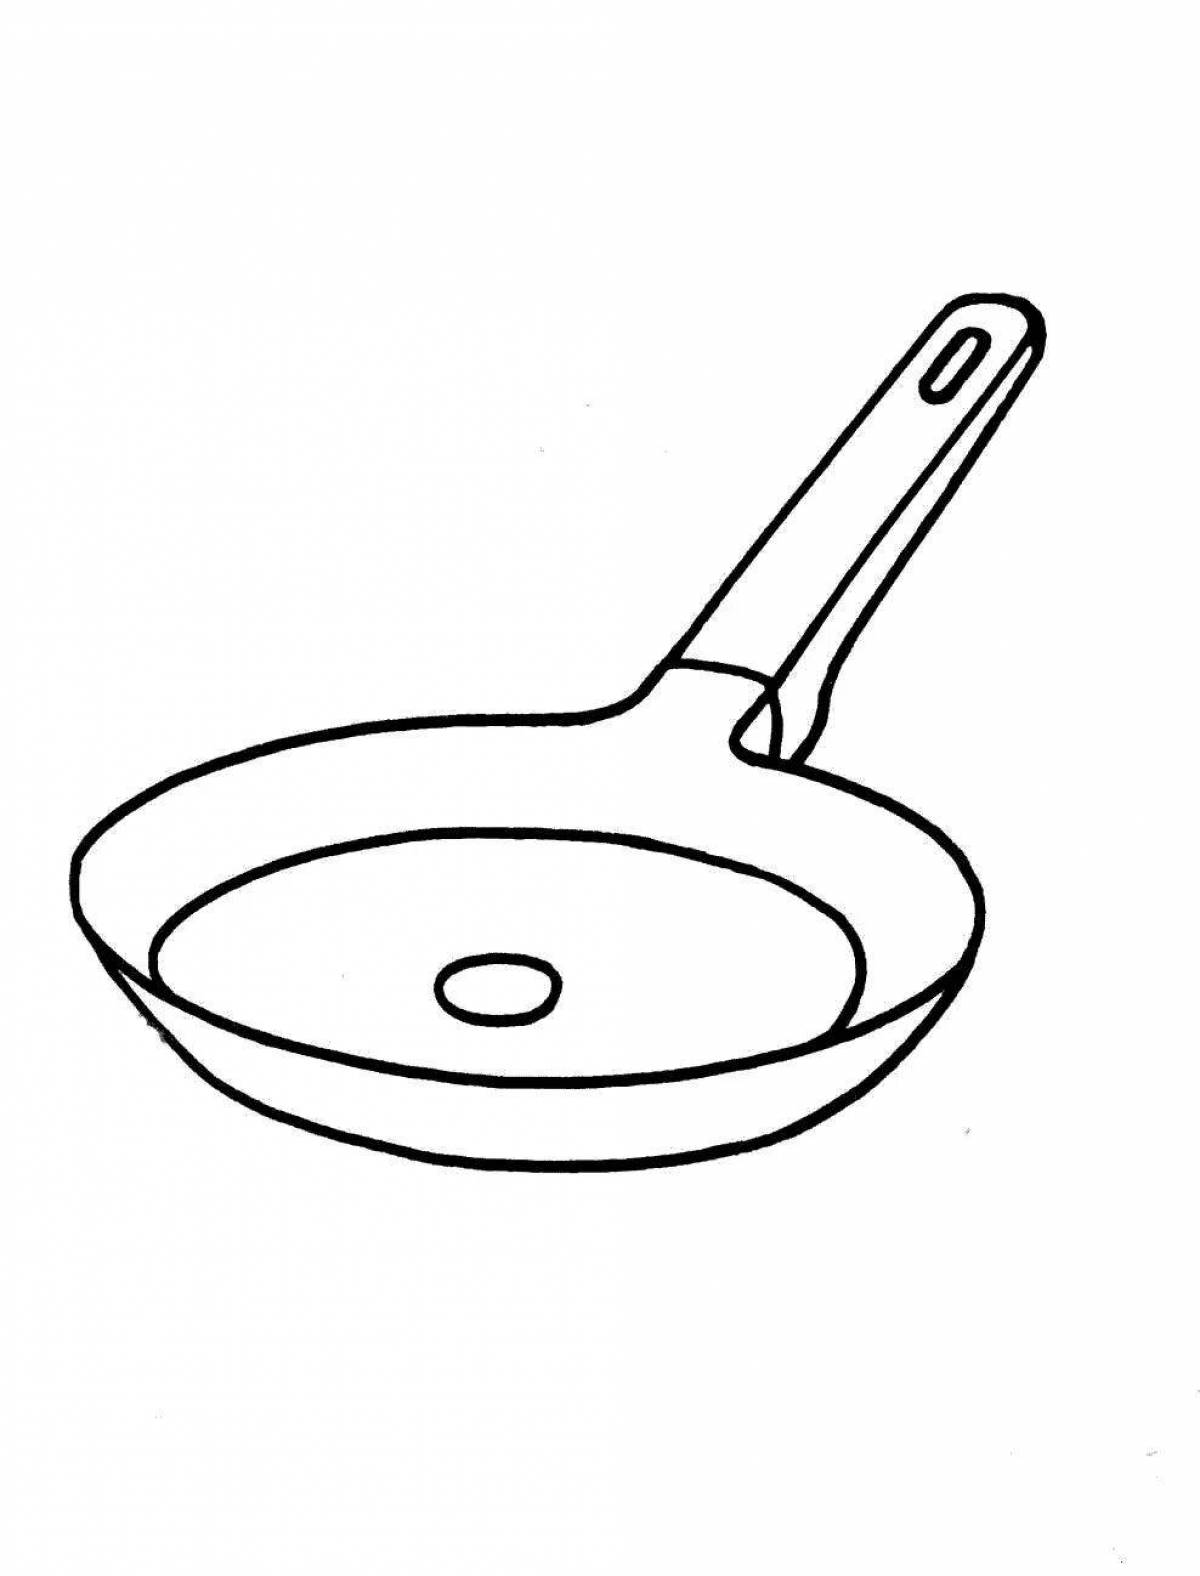 Playful frying pan coloring page for toddlers